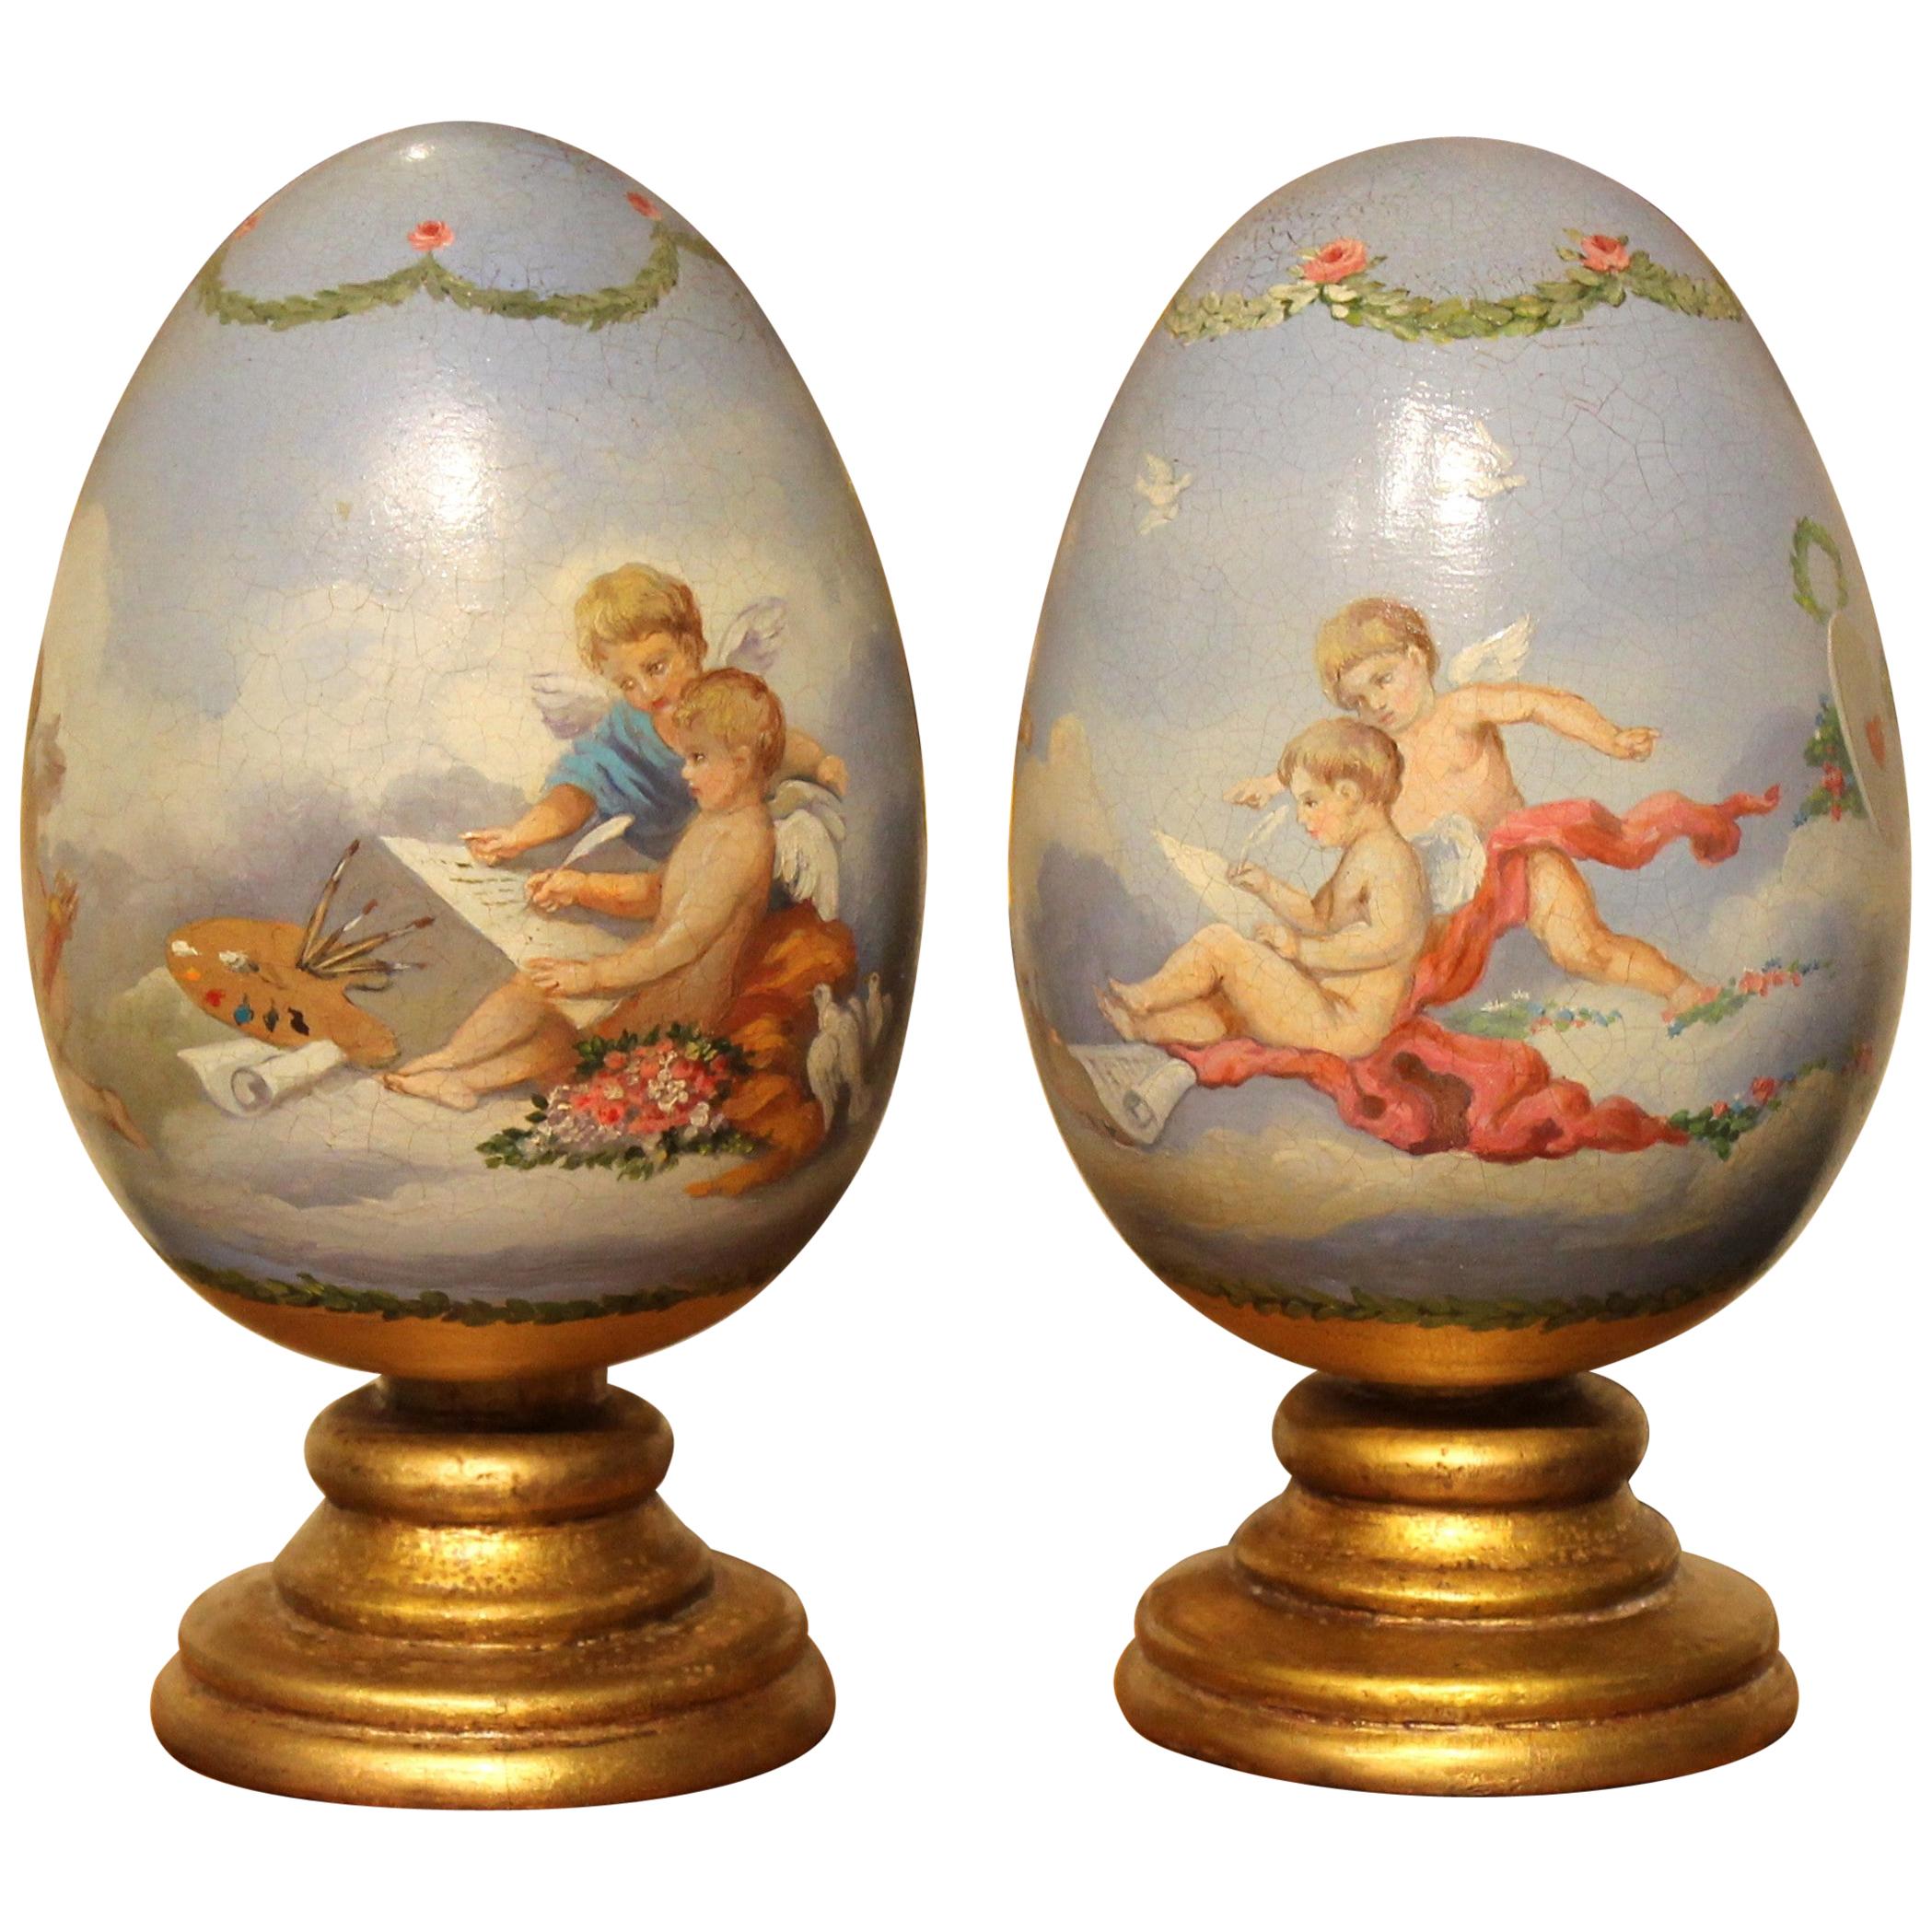 Italian Romantic Hand Painted Decorative Terracotta Eggs on Giltwood Stands